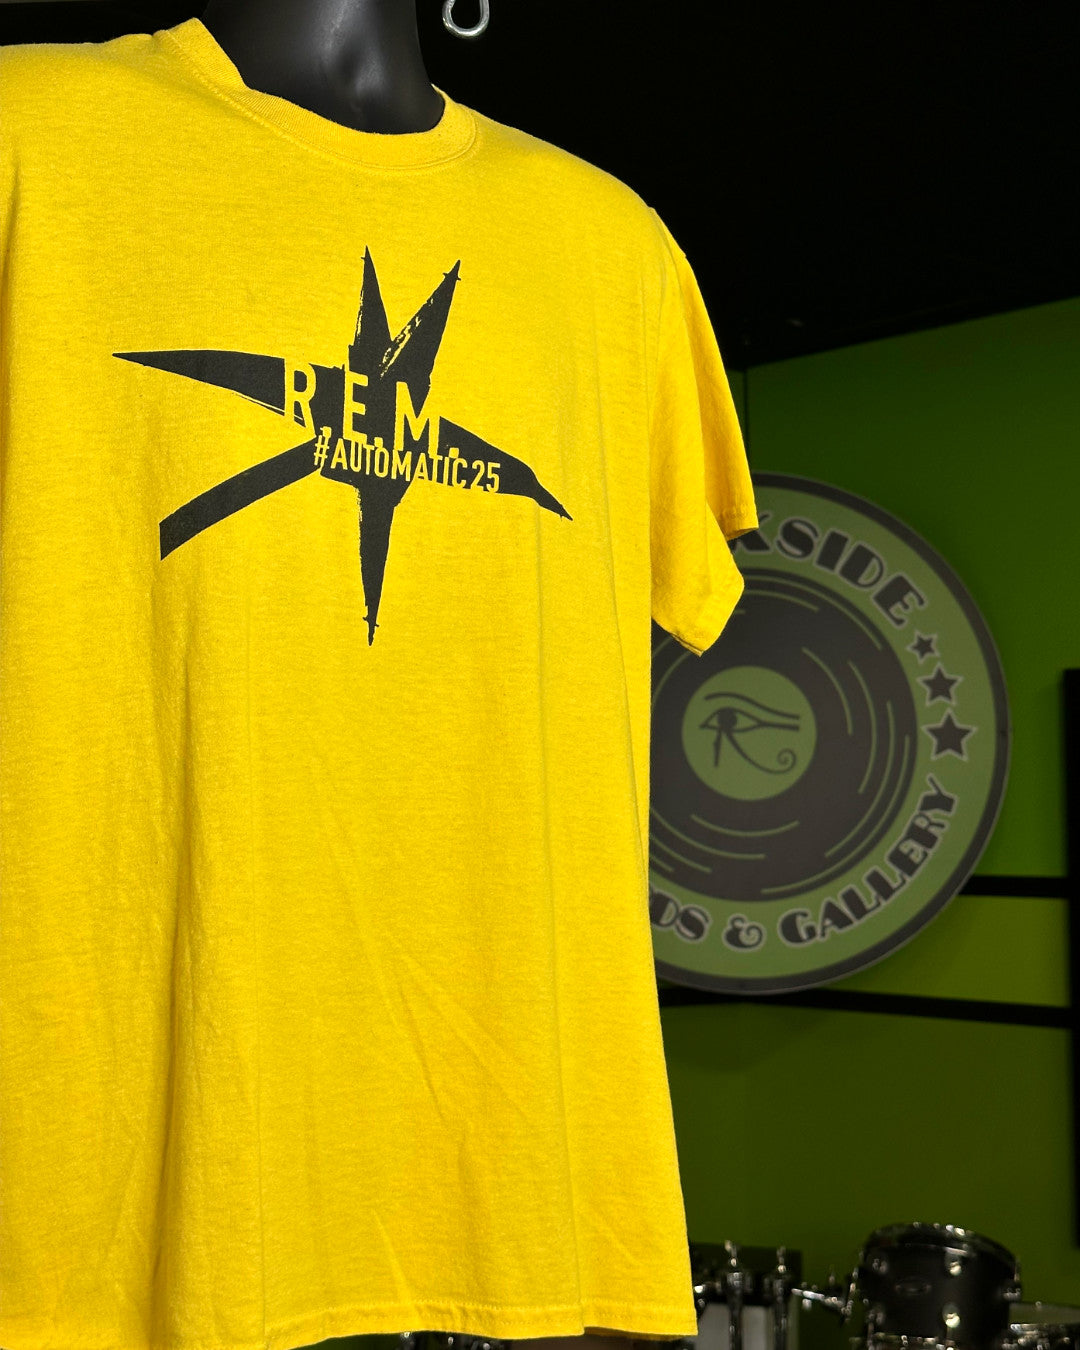 R.E.M. Automatic For The People 25th Anniversary T-Shirt, Yellow, L - Darkside Records